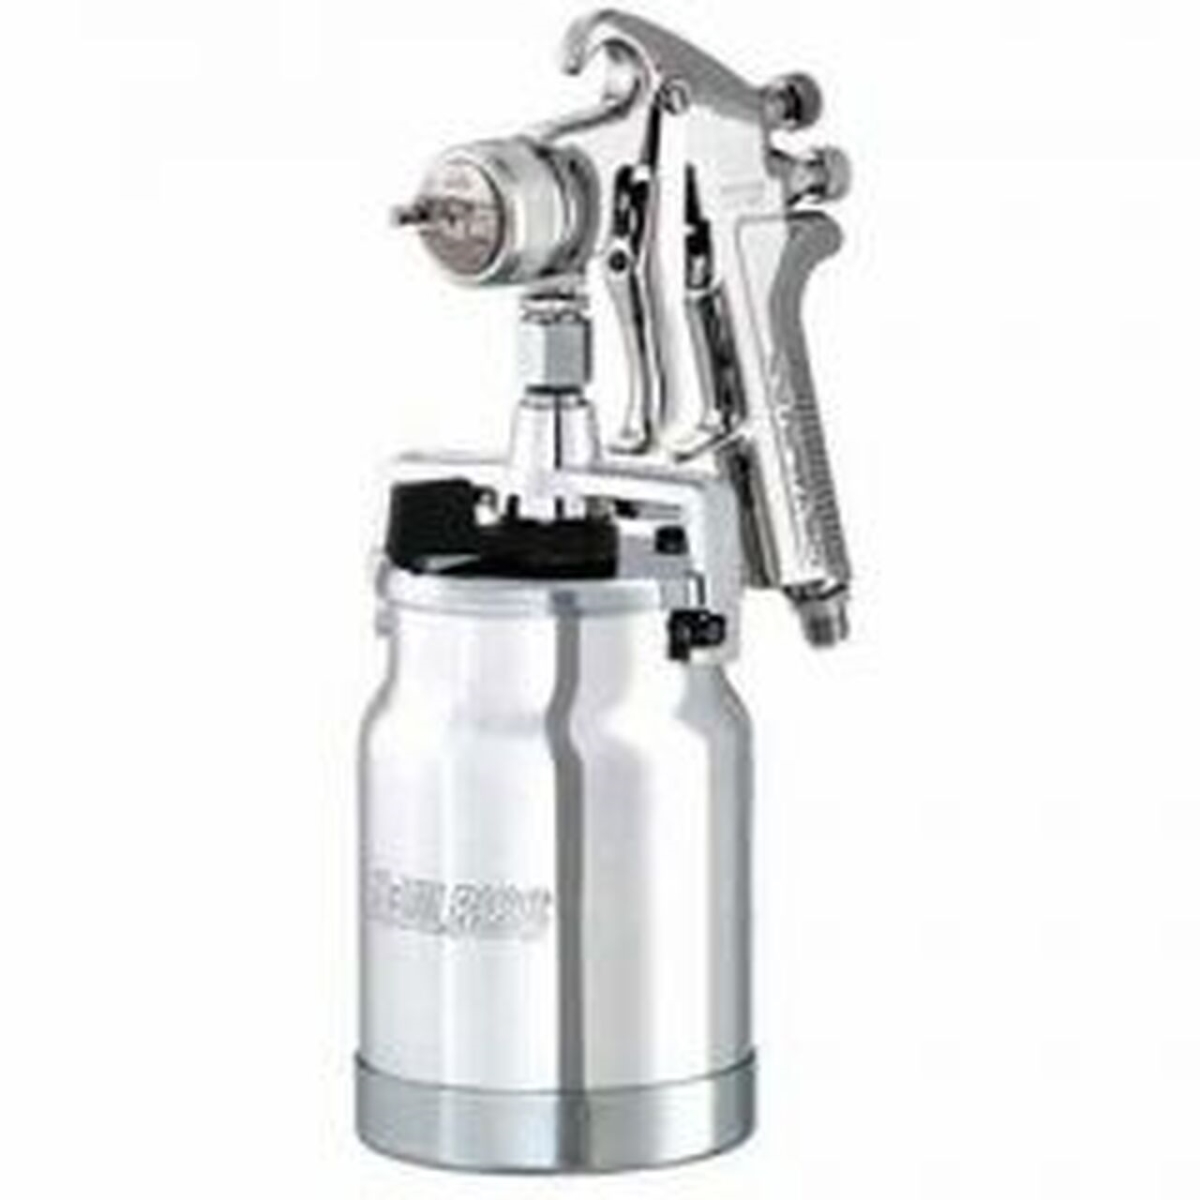 Picture of DeVilbiss DEV905122 ProLite Suction Feed Premium Professional Conventional Spray Gun with 1.6 mm Nozzle